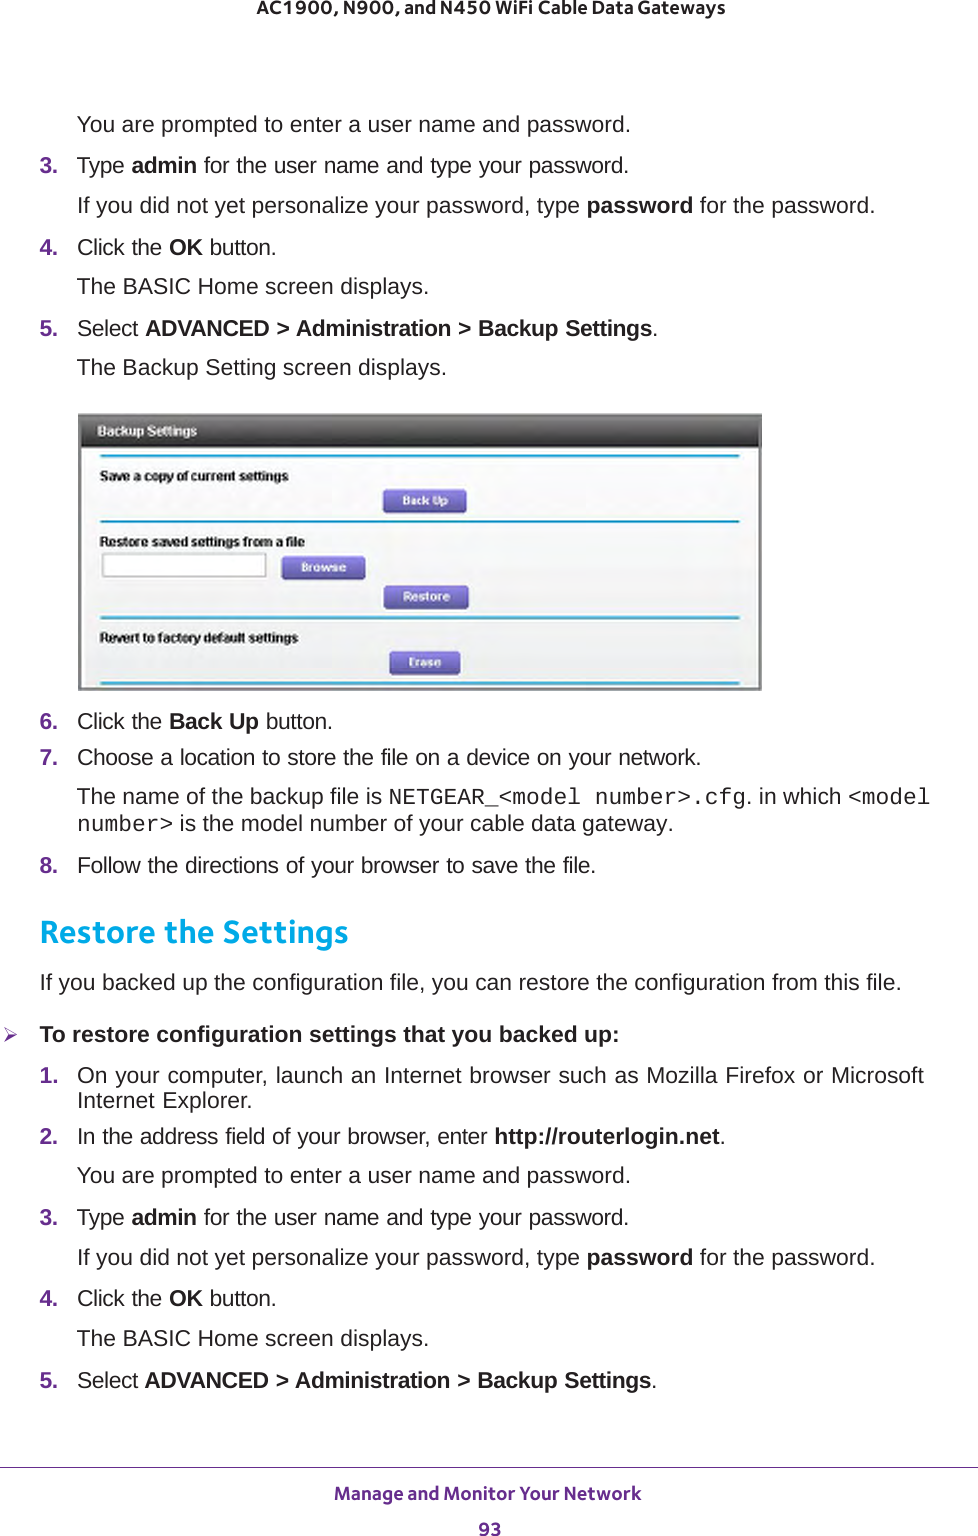 Manage and Monitor Your Network 93 AC1900, N900, and N450 WiFi Cable Data GatewaysYou are prompted to enter a user name and password.3.  Type admin for the user name and type your password.If you did not yet personalize your password, type password for the password.4.  Click the OK button. The BASIC Home screen displays.5.  Select ADVANCED &gt; Administration &gt; Backup Settings.The Backup Setting screen displays.6.  Click the Back Up button.7.  Choose a location to store the file on a device on your network.The name of the backup file is NETGEAR_&lt;model number&gt;.cfg. in which &lt;model number&gt; is the model number of your cable data gateway. 8.  Follow the directions of your browser to save the file.Restore the SettingsIf you backed up the configuration file, you can restore the configuration from this file.To restore configuration settings that you backed up:1.  On your computer, launch an Internet browser such as Mozilla Firefox or Microsoft Internet Explorer. 2.  In the address field of your browser, enter http://routerlogin.net.You are prompted to enter a user name and password.3.  Type admin for the user name and type your password.If you did not yet personalize your password, type password for the password.4.  Click the OK button. The BASIC Home screen displays.5.  Select ADVANCED &gt; Administration &gt; Backup Settings.